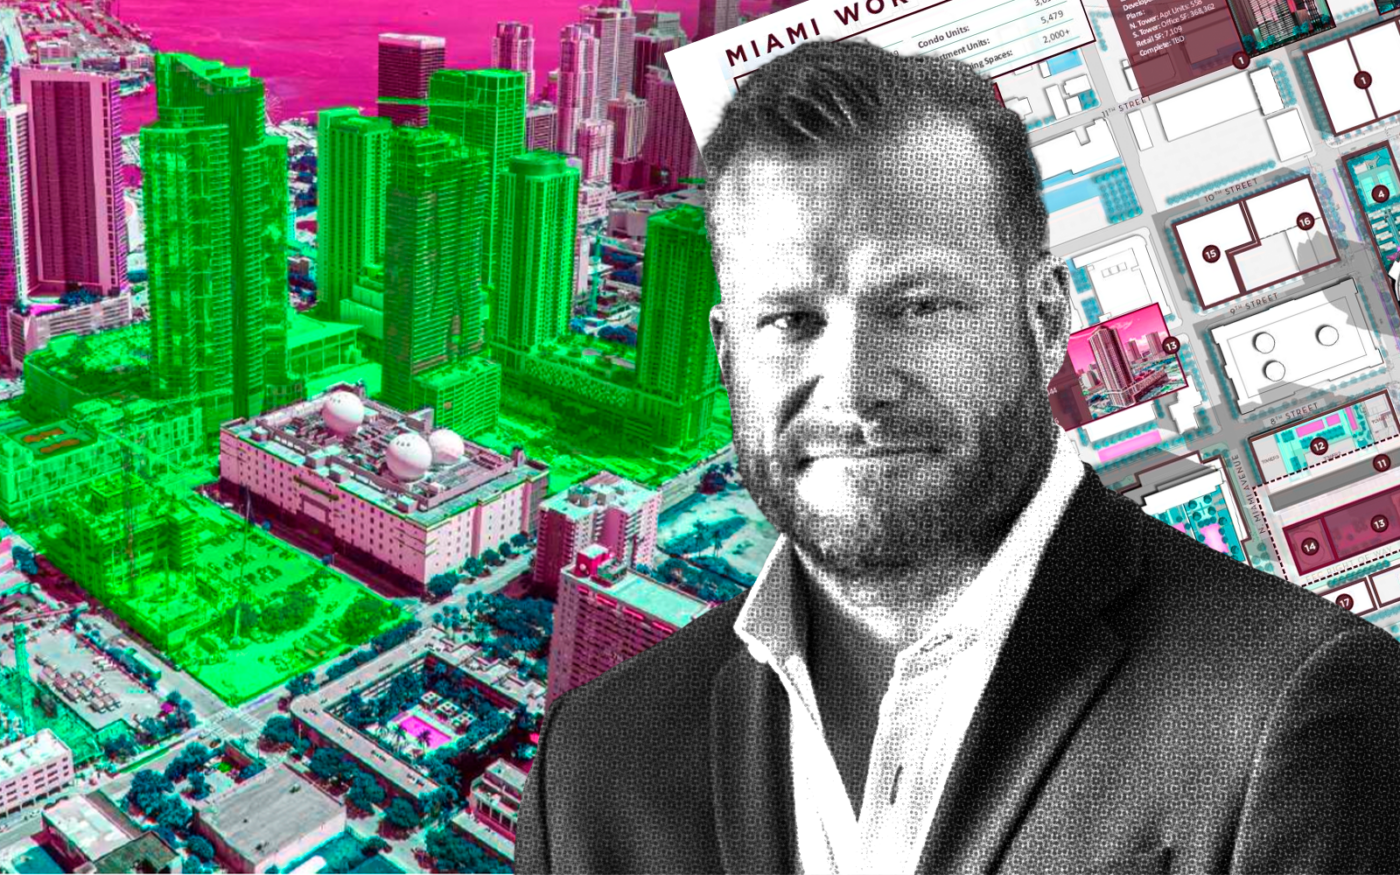 Lynd Buying Condo Dev Site in Miami Worldcenter for $35M